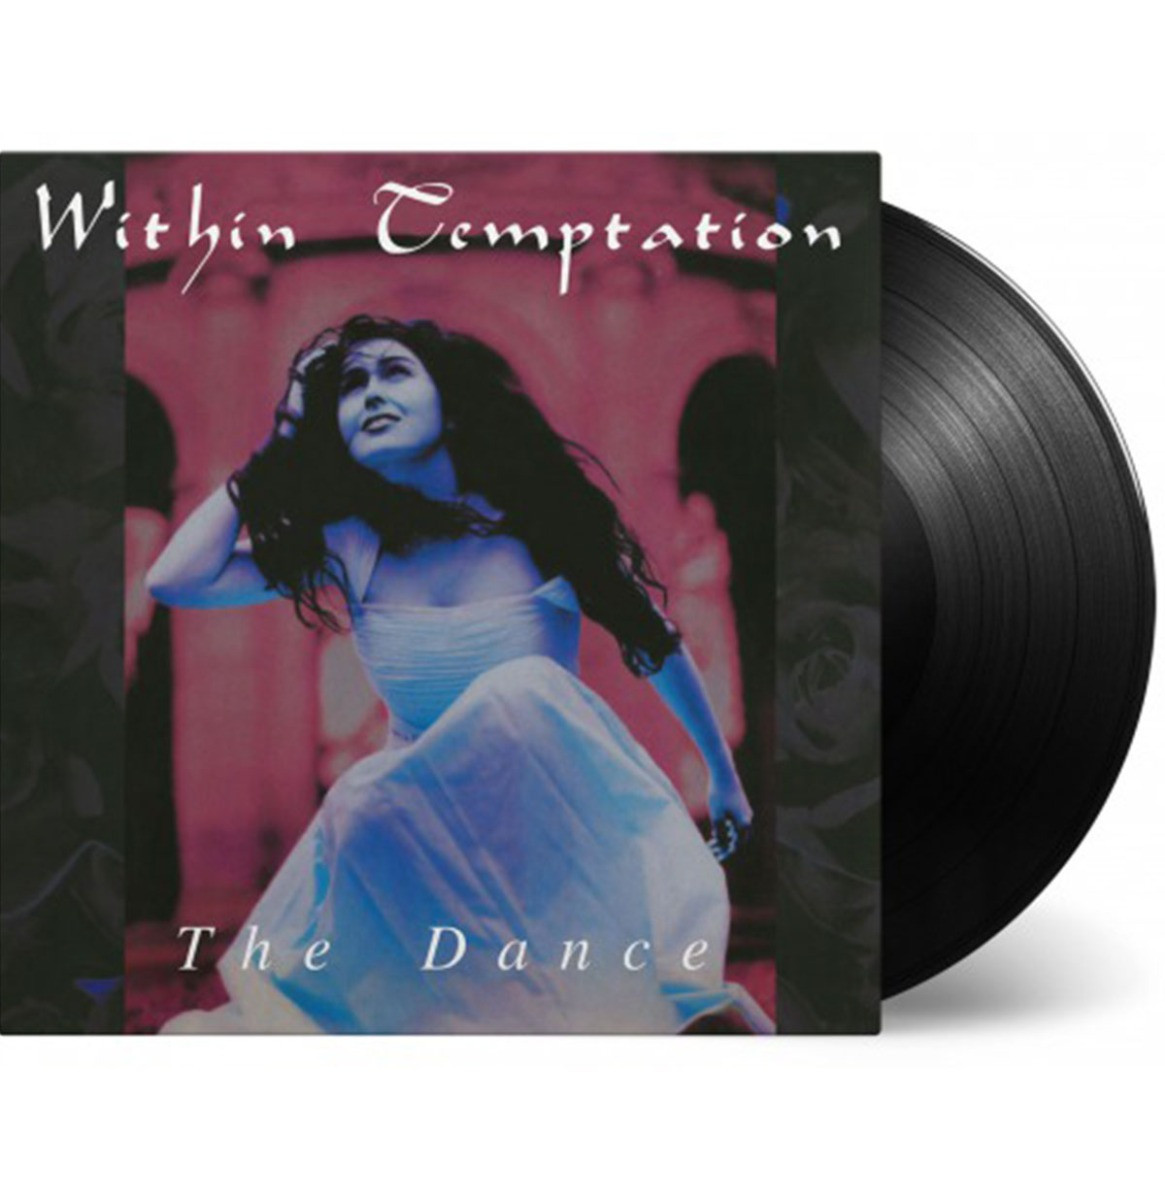 Within Temptation - The Dance LP